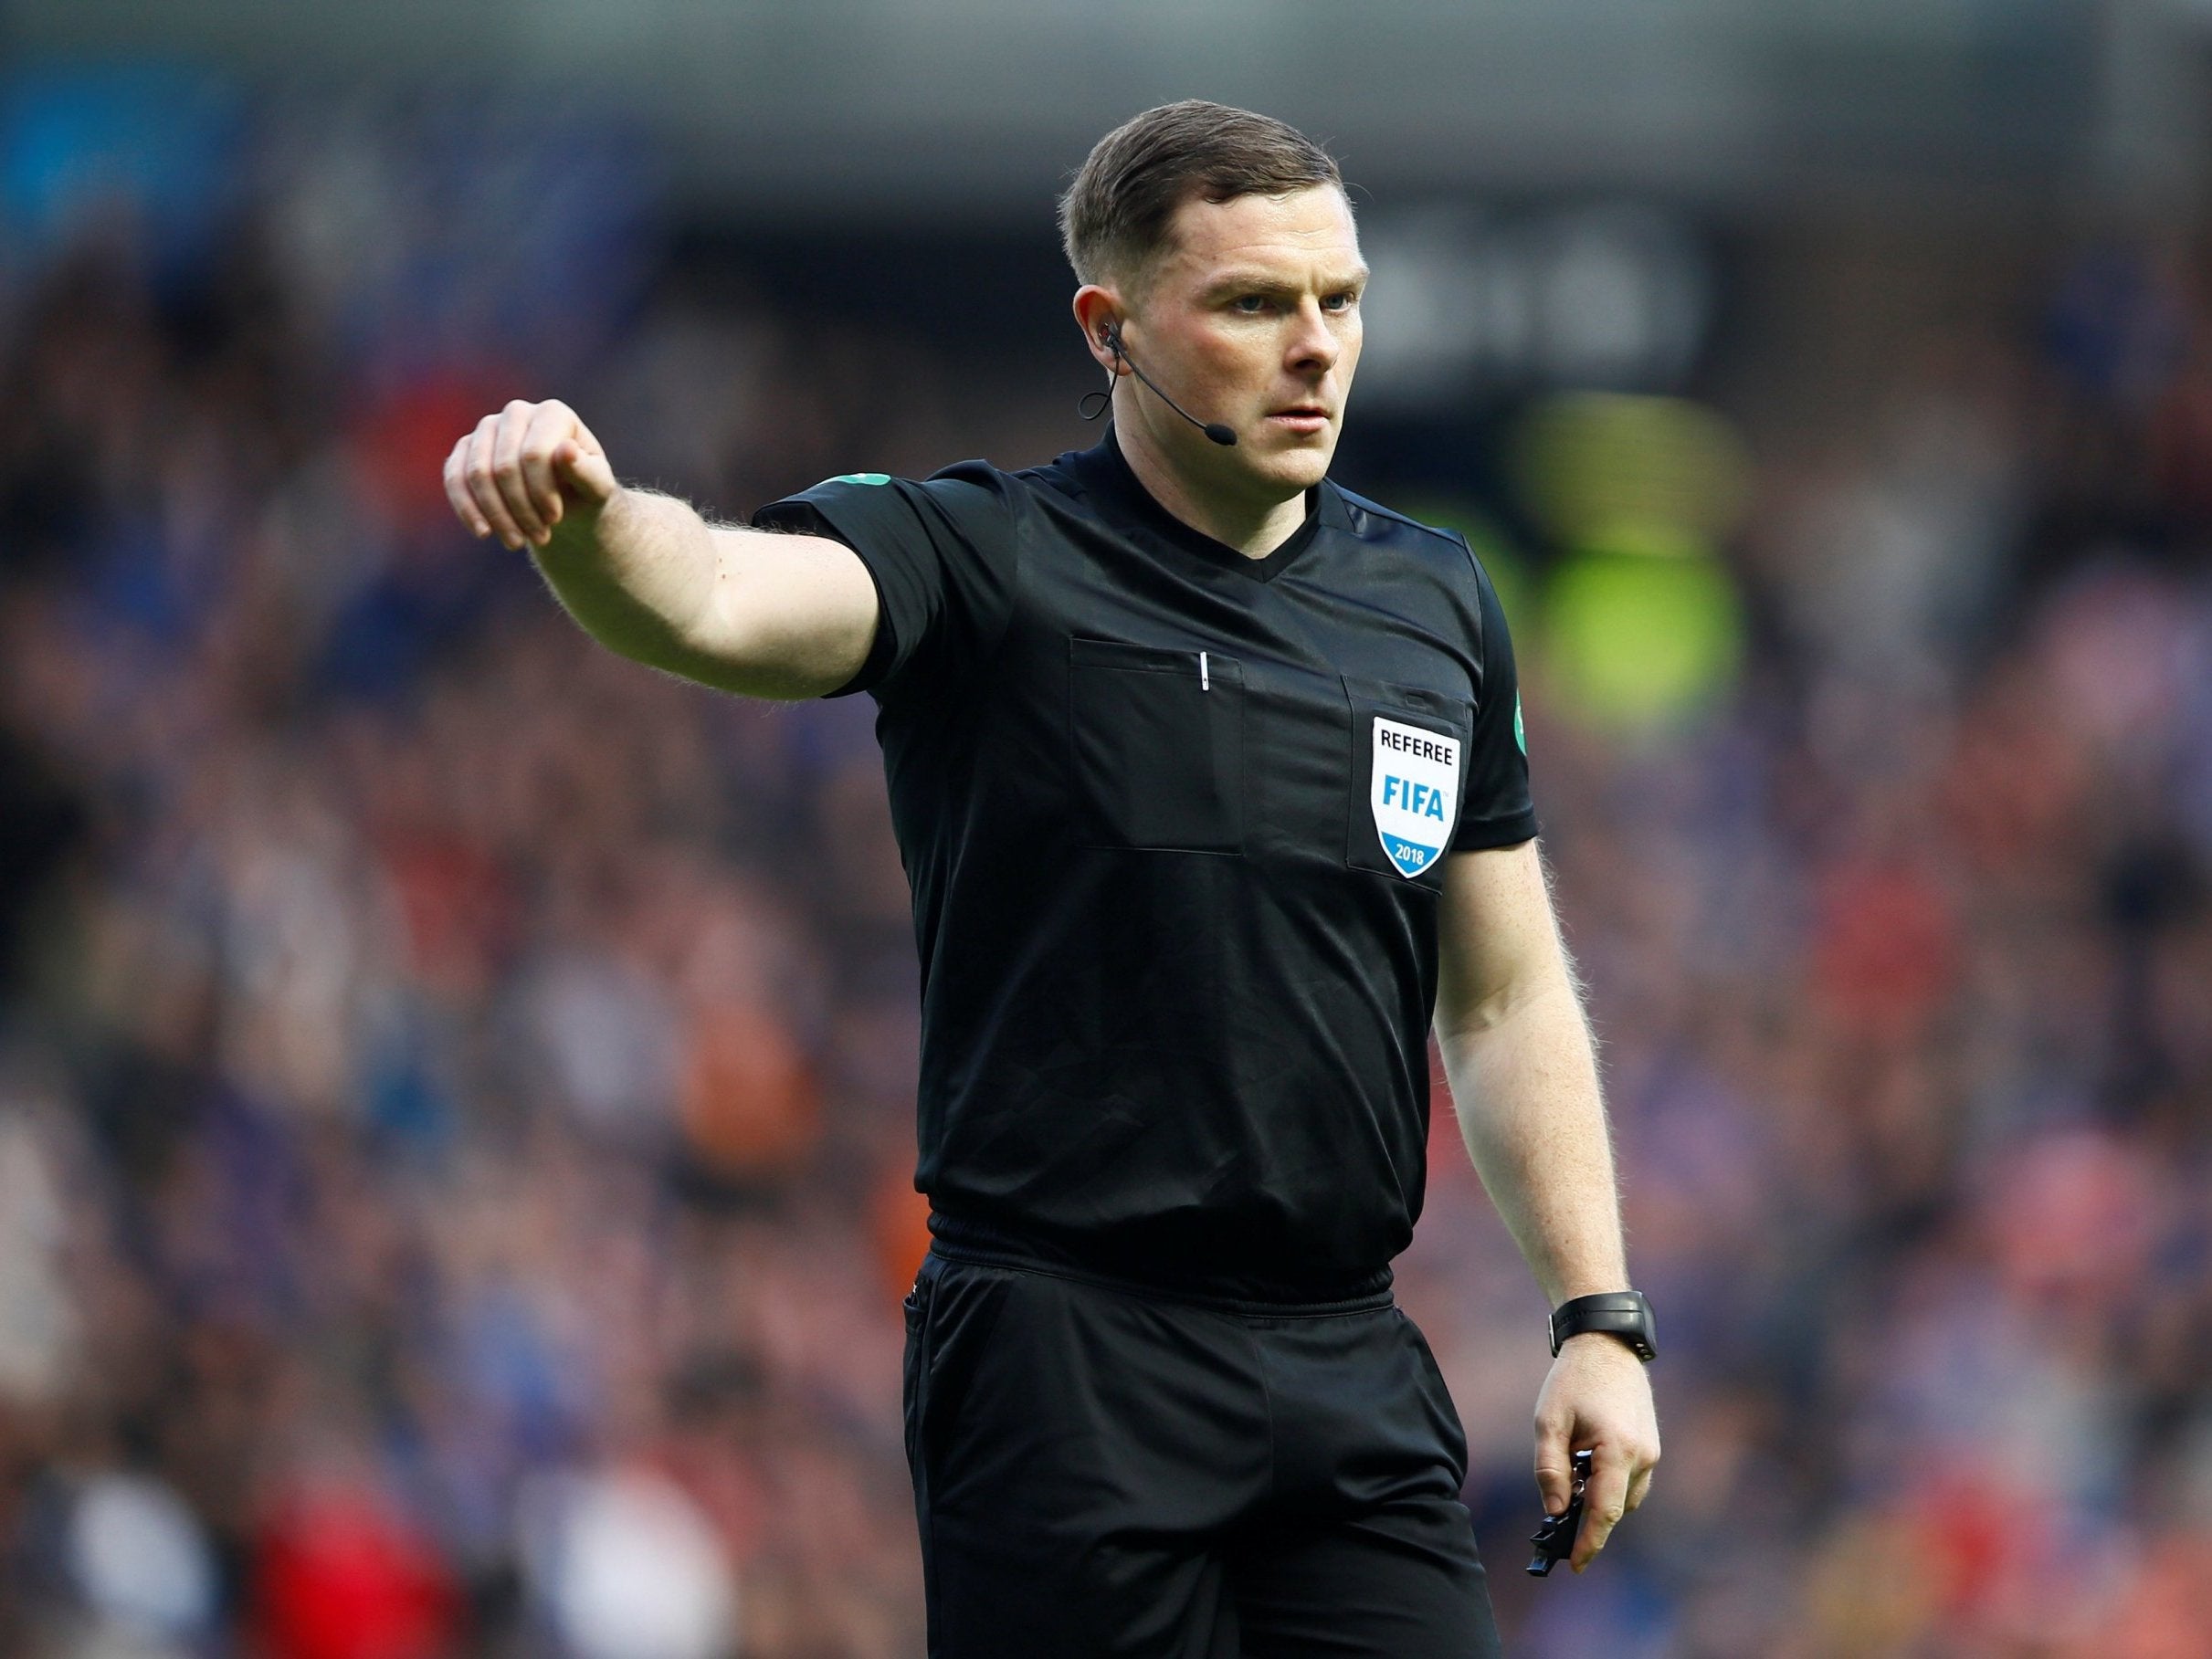 Referee John Beaton has been targeted with threatening messages